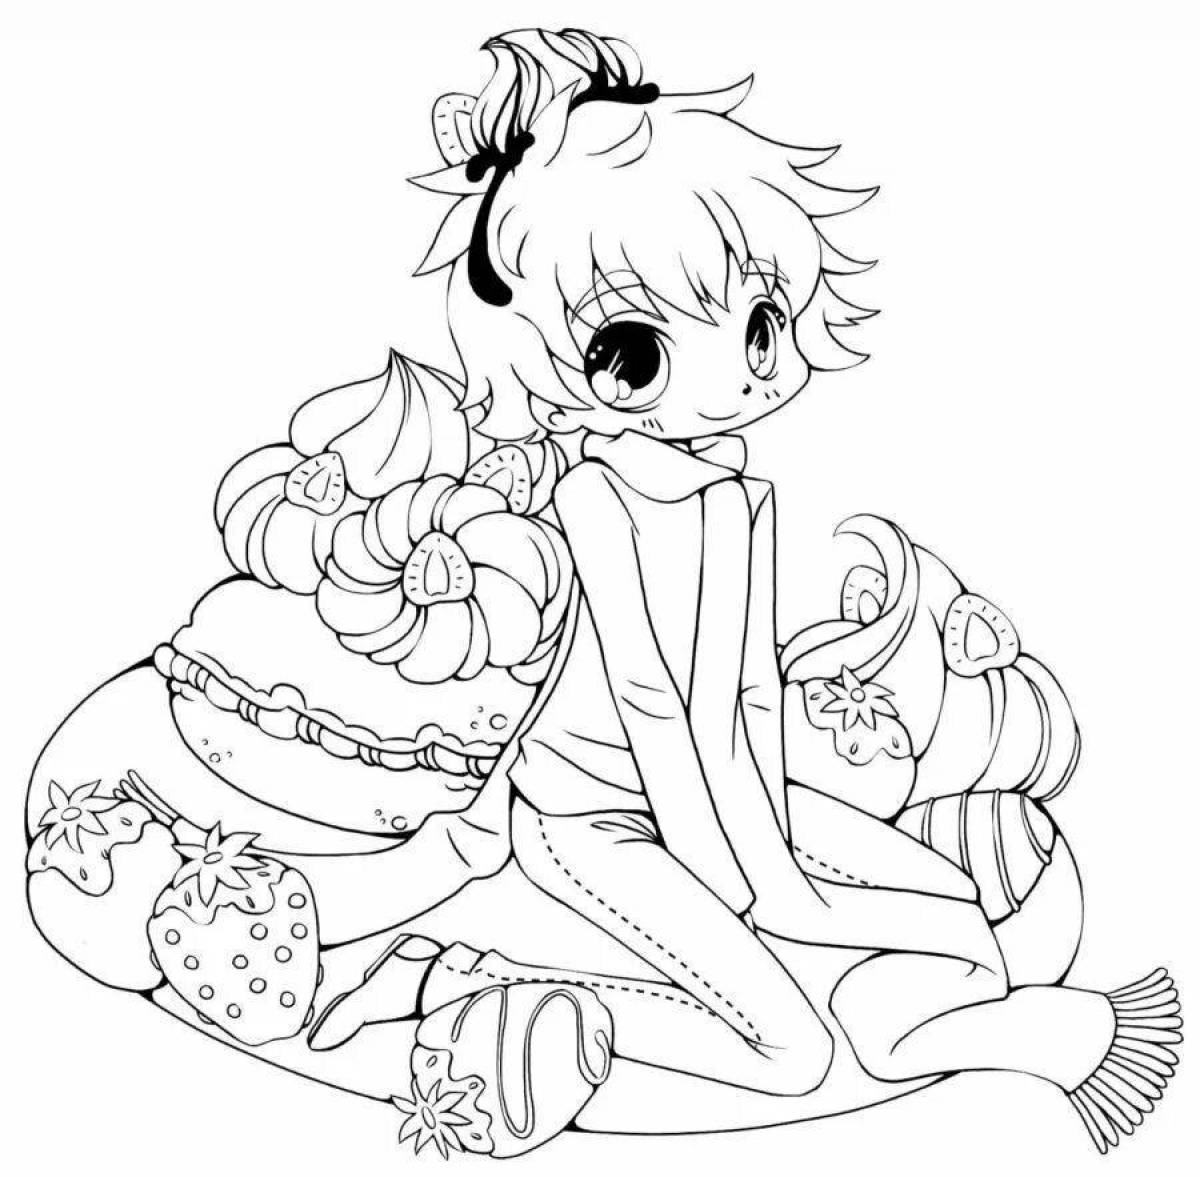 Radiant coloring page for girls anime cute